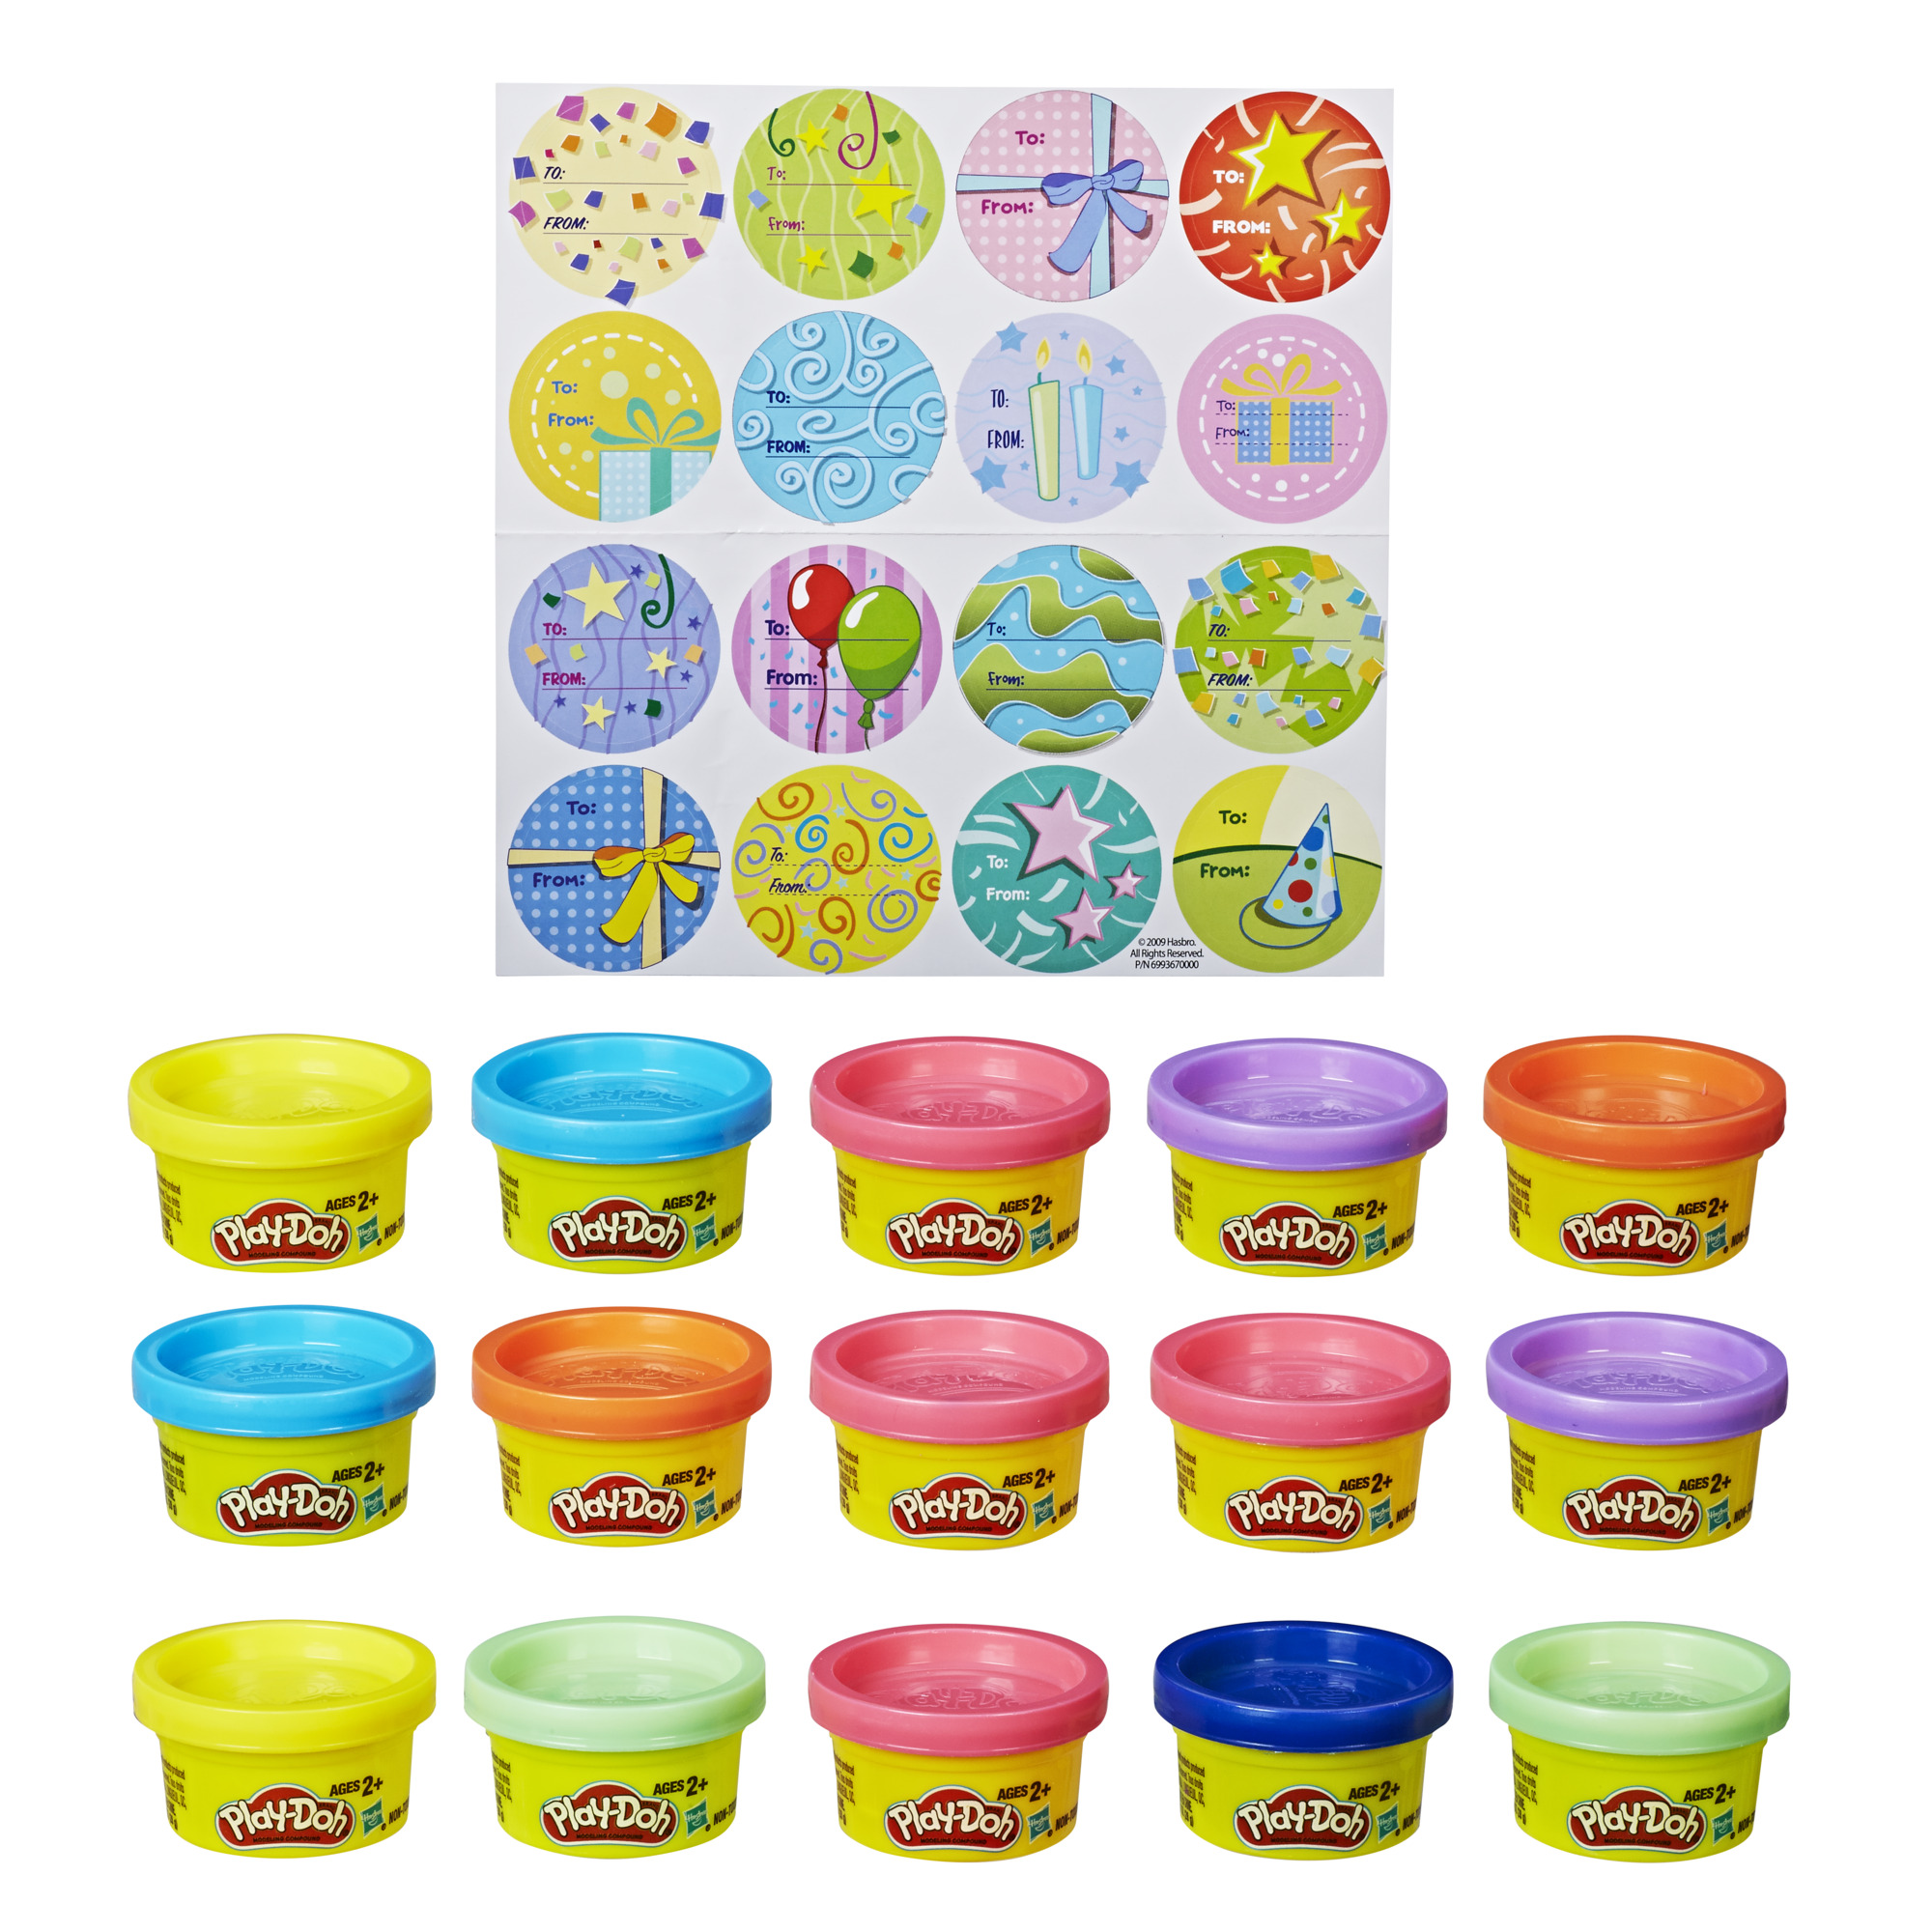 Play-Doh Party Bag with 15 Colorful Cans of Play-Doh, 1 Ounce Cans